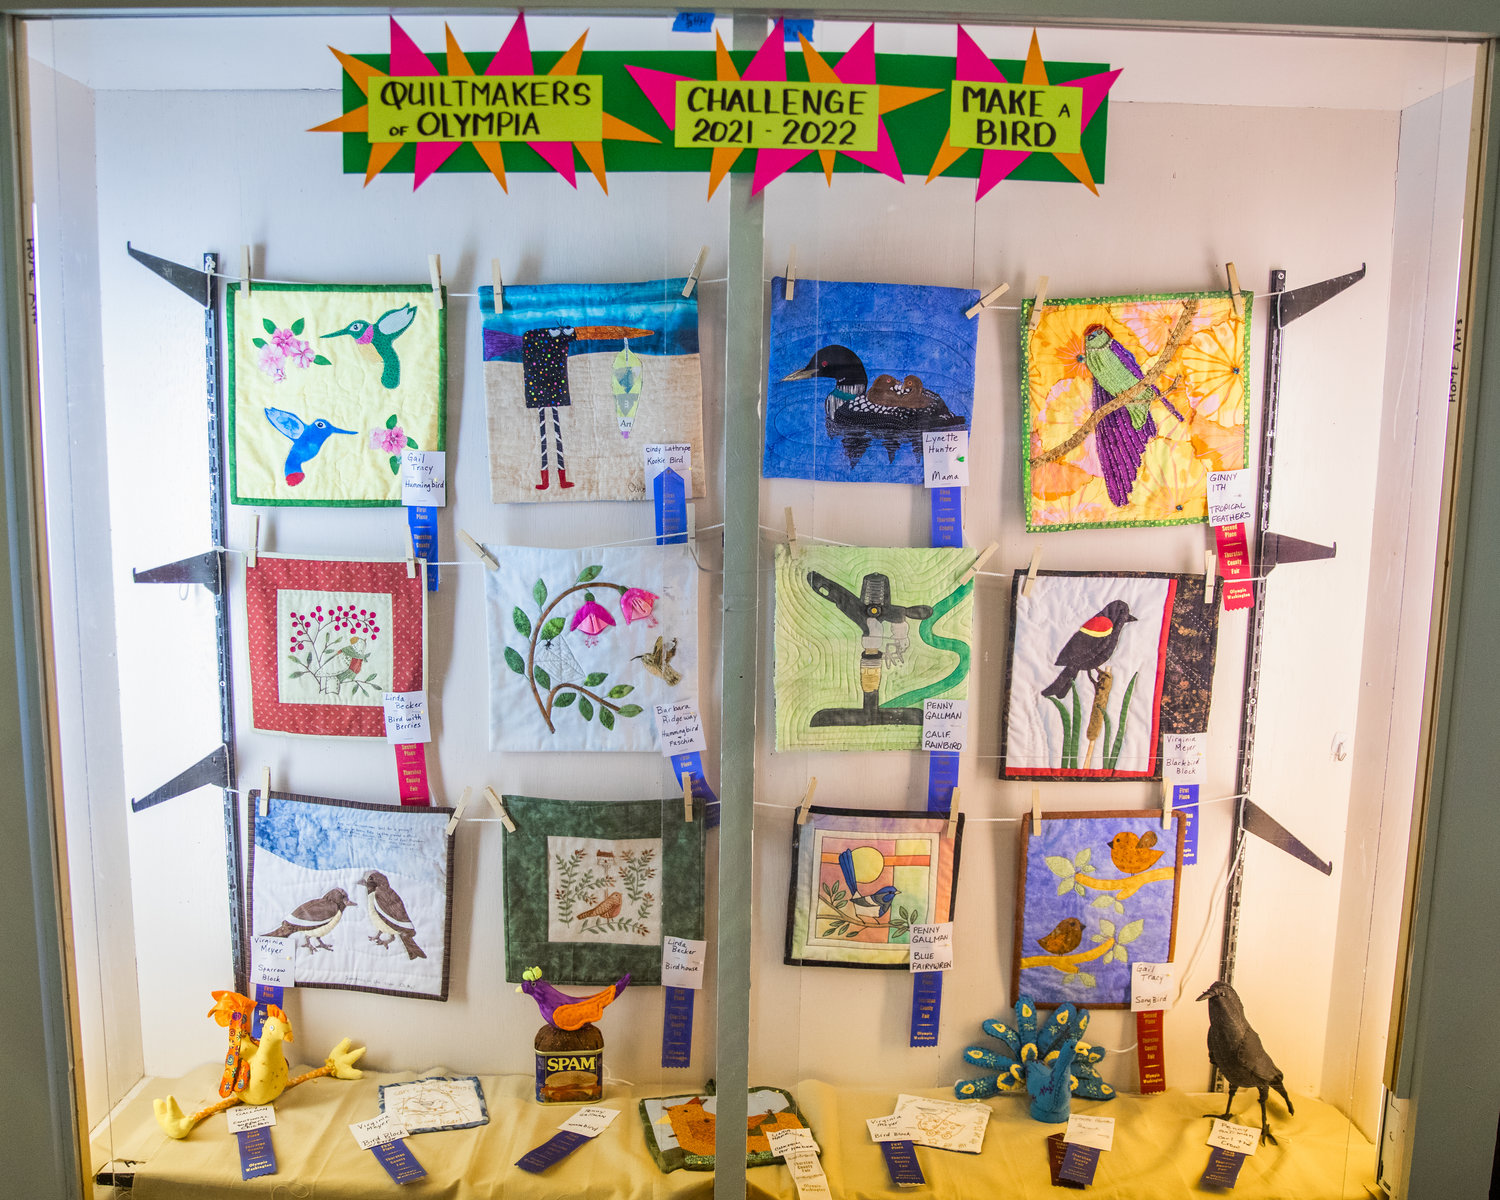 The Quiltmakers of Olympia challenge, “Make a Bird,” sits on display during the Thurston County Fair on Thursday, July 28 in the Home Arts building.